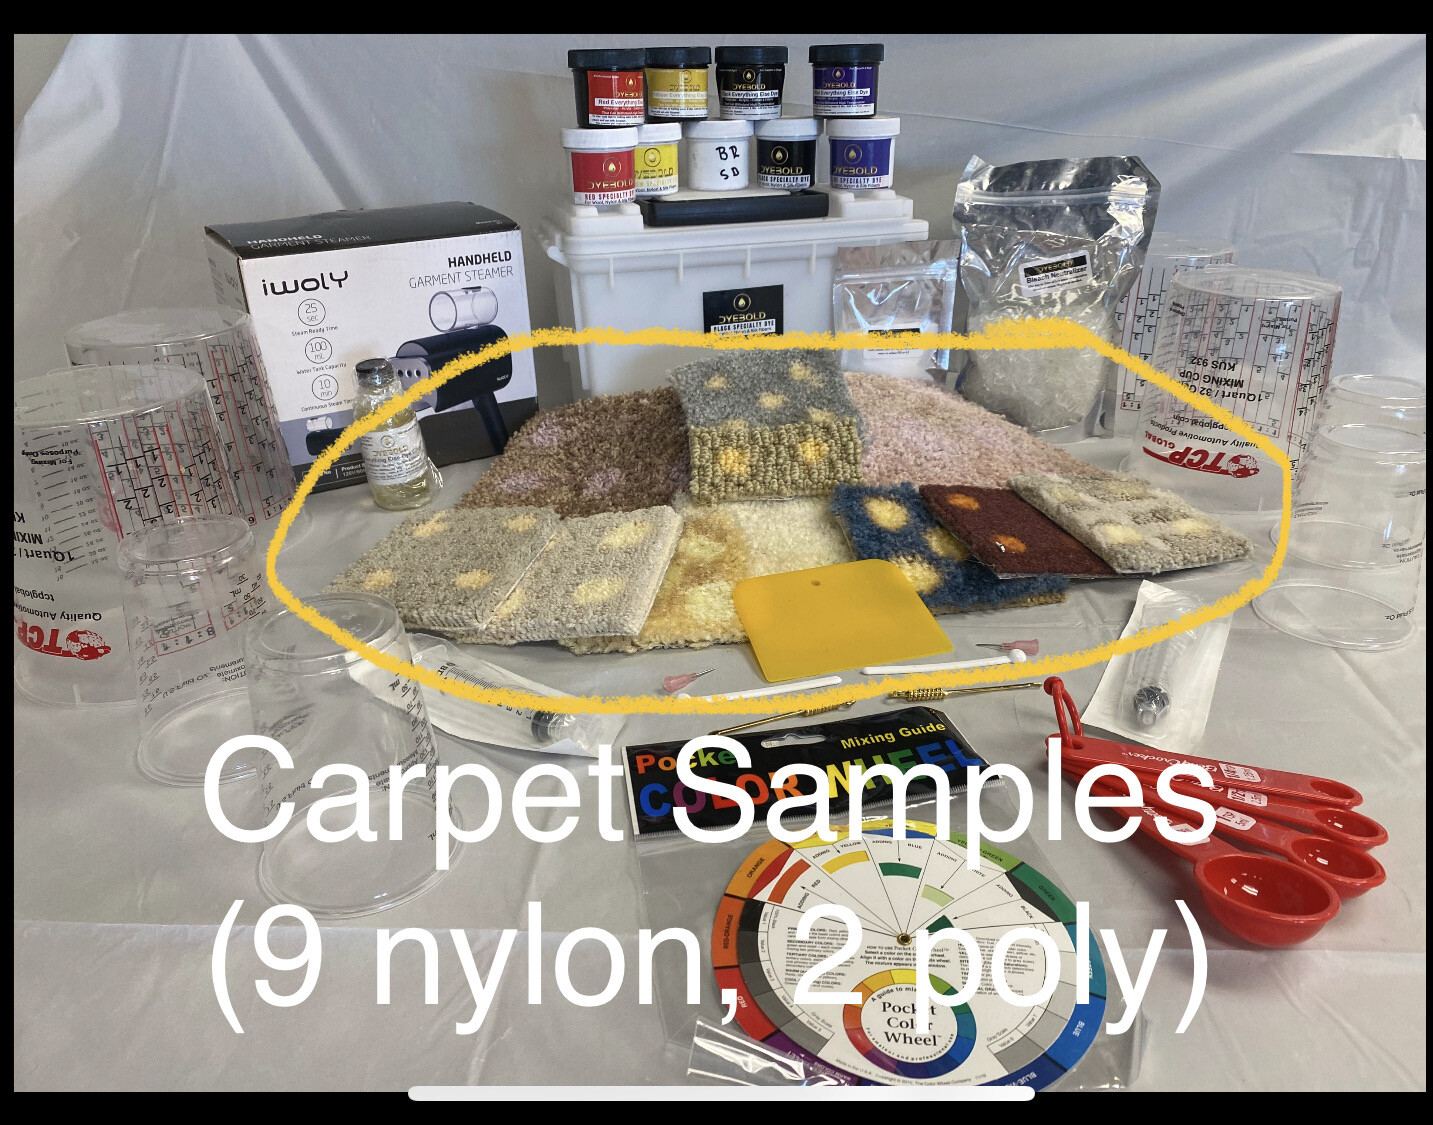 Carpet Samples For Carpet Dyeing Made Easy - Level 2 (advanced Practice Used In Advanced Carpet Dyeing Training) Includes Nylon, Wool, Poly 